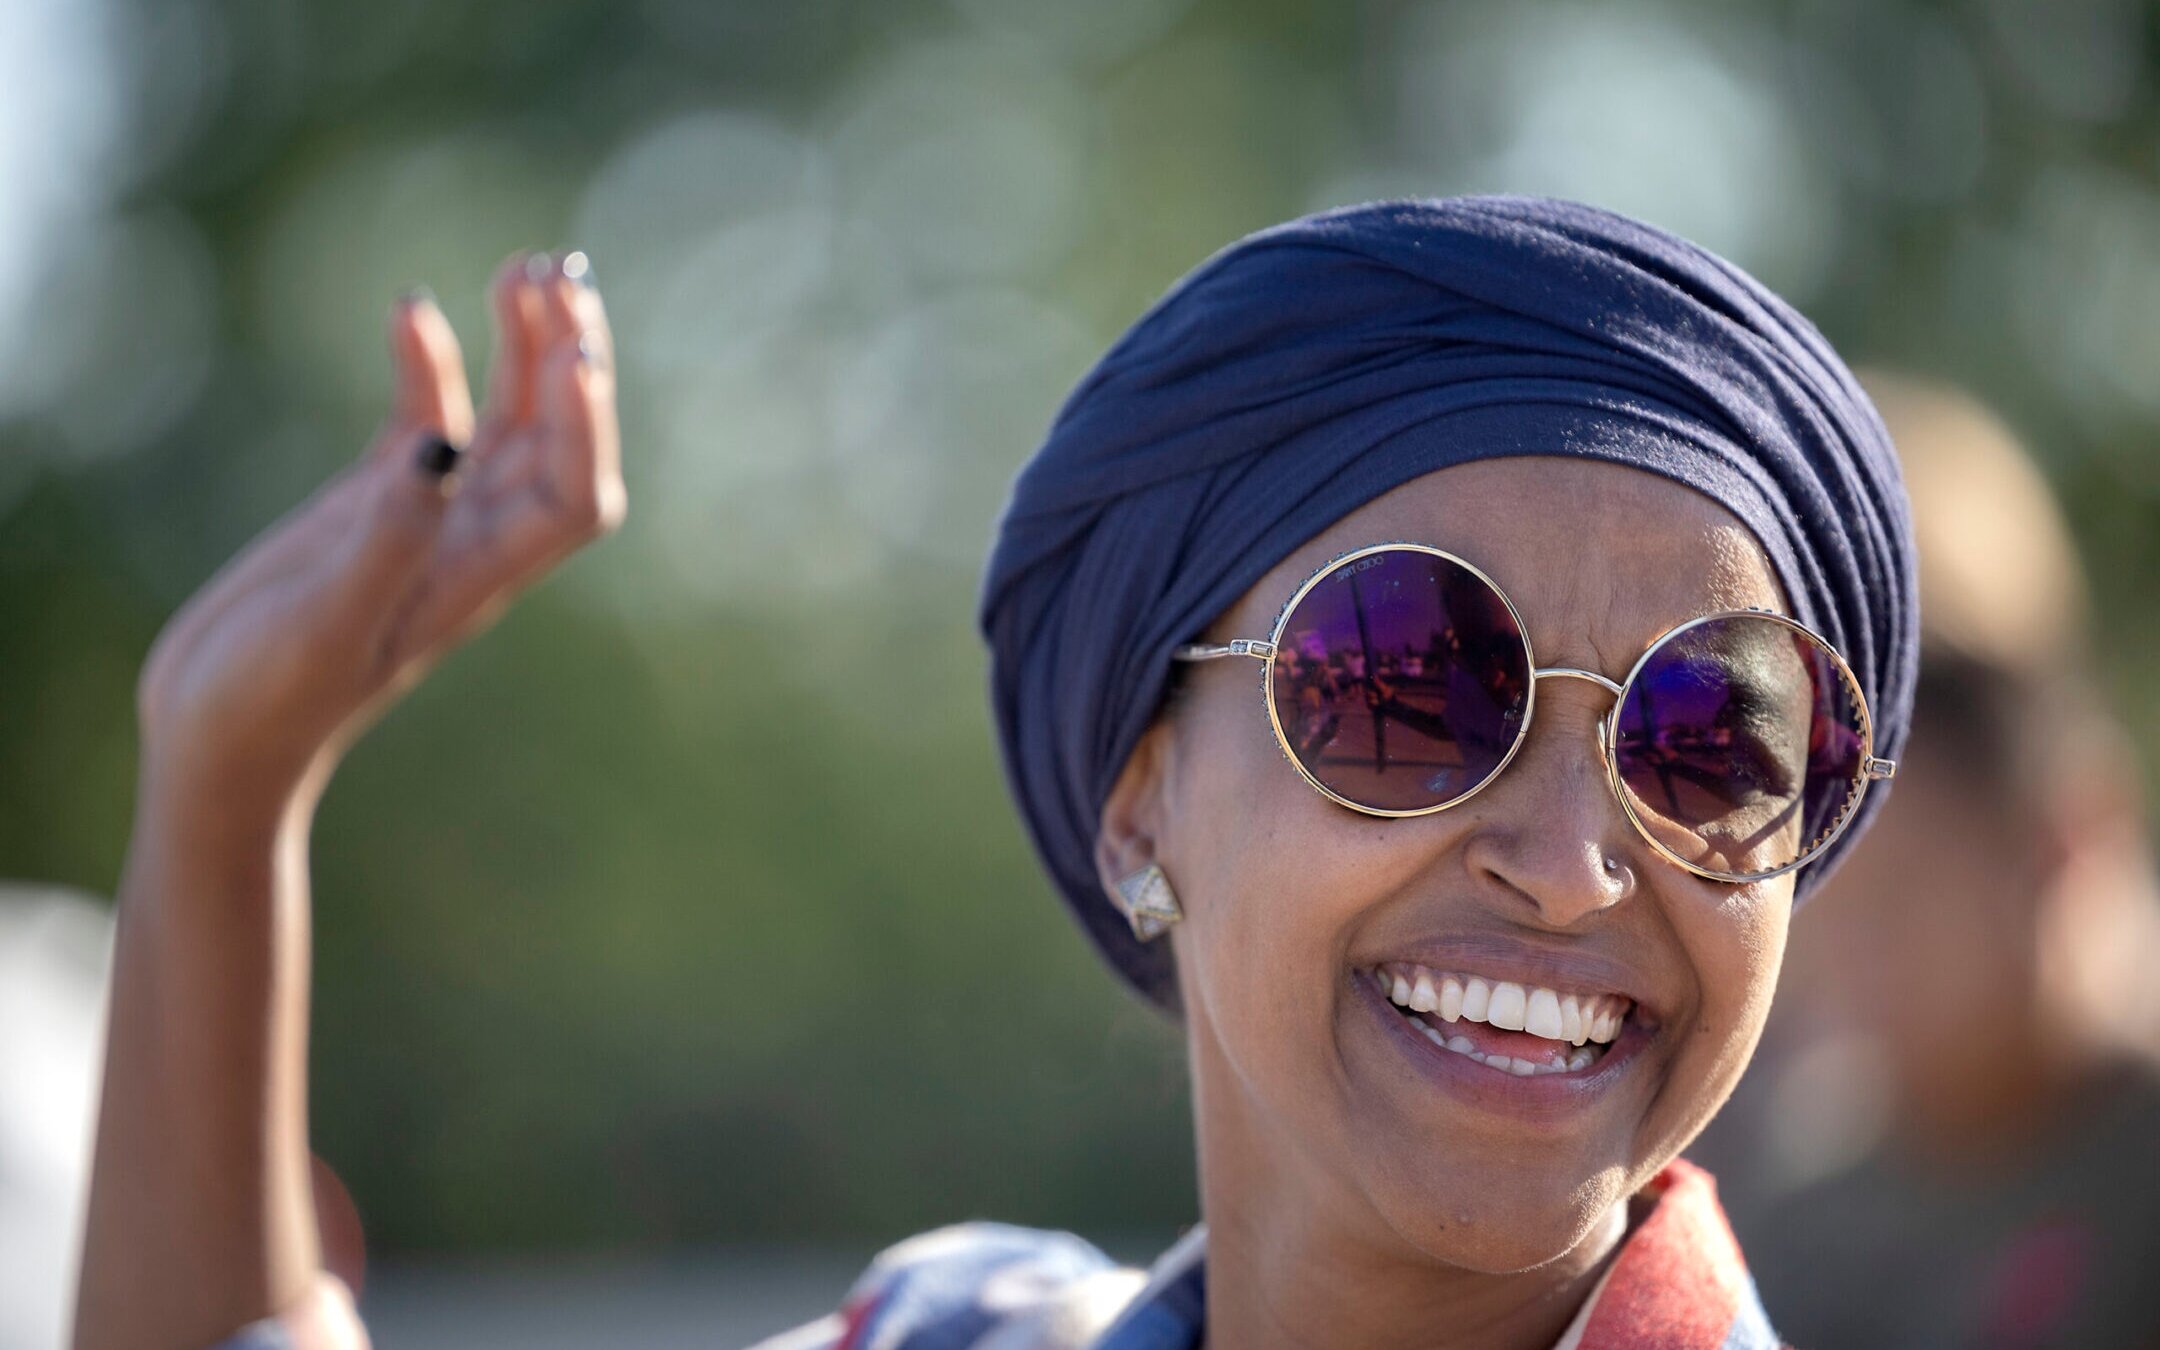 U.S. Rep. Ilhan Omar waves during a voter engagement event in Minneapolis, Aug. 9, 2022. (Star Tribune via Getty Images)